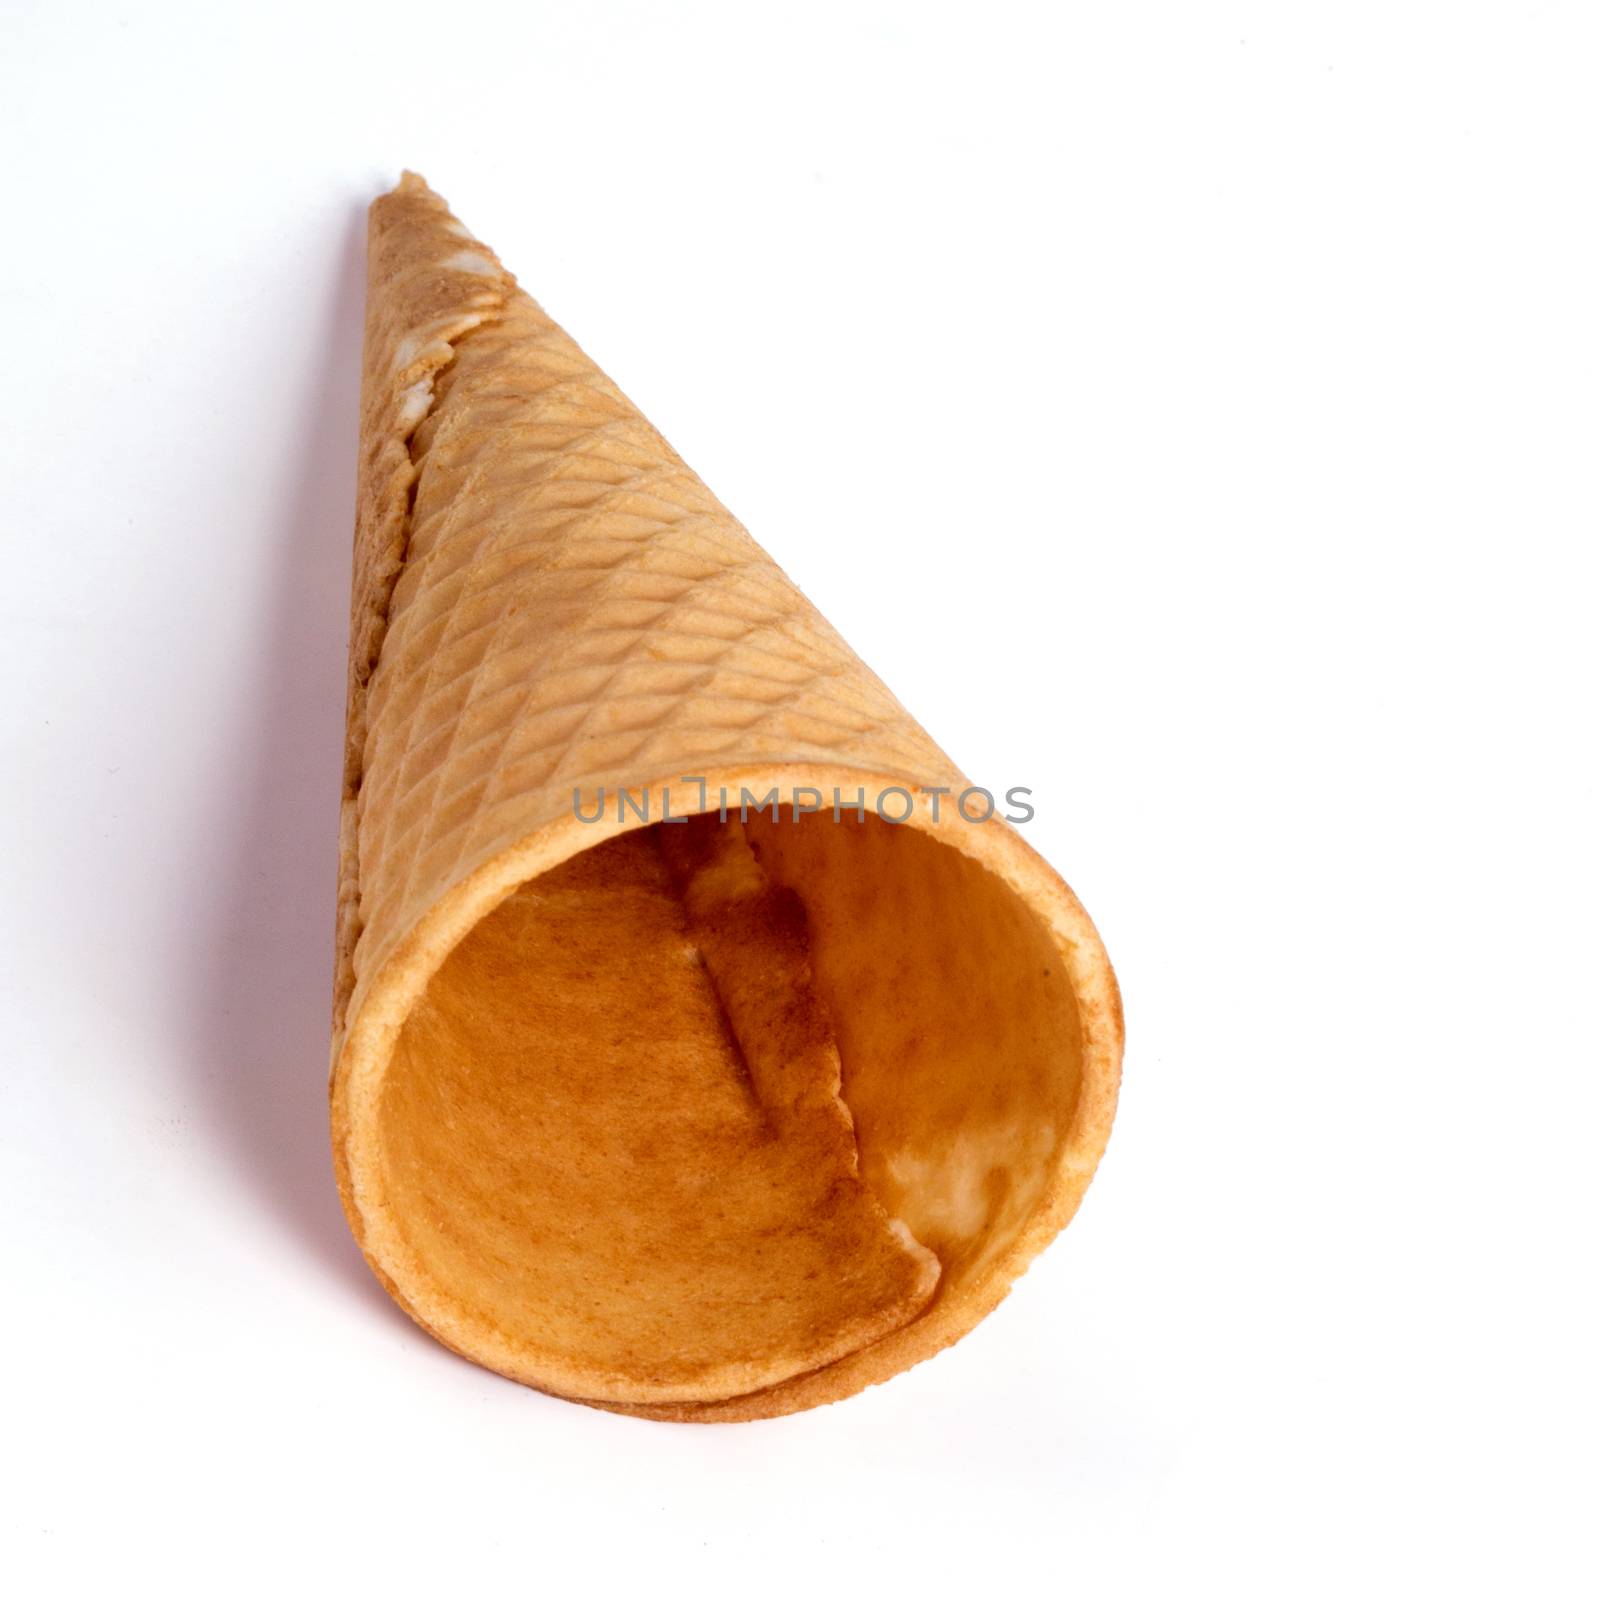 Waffle cone on a white background